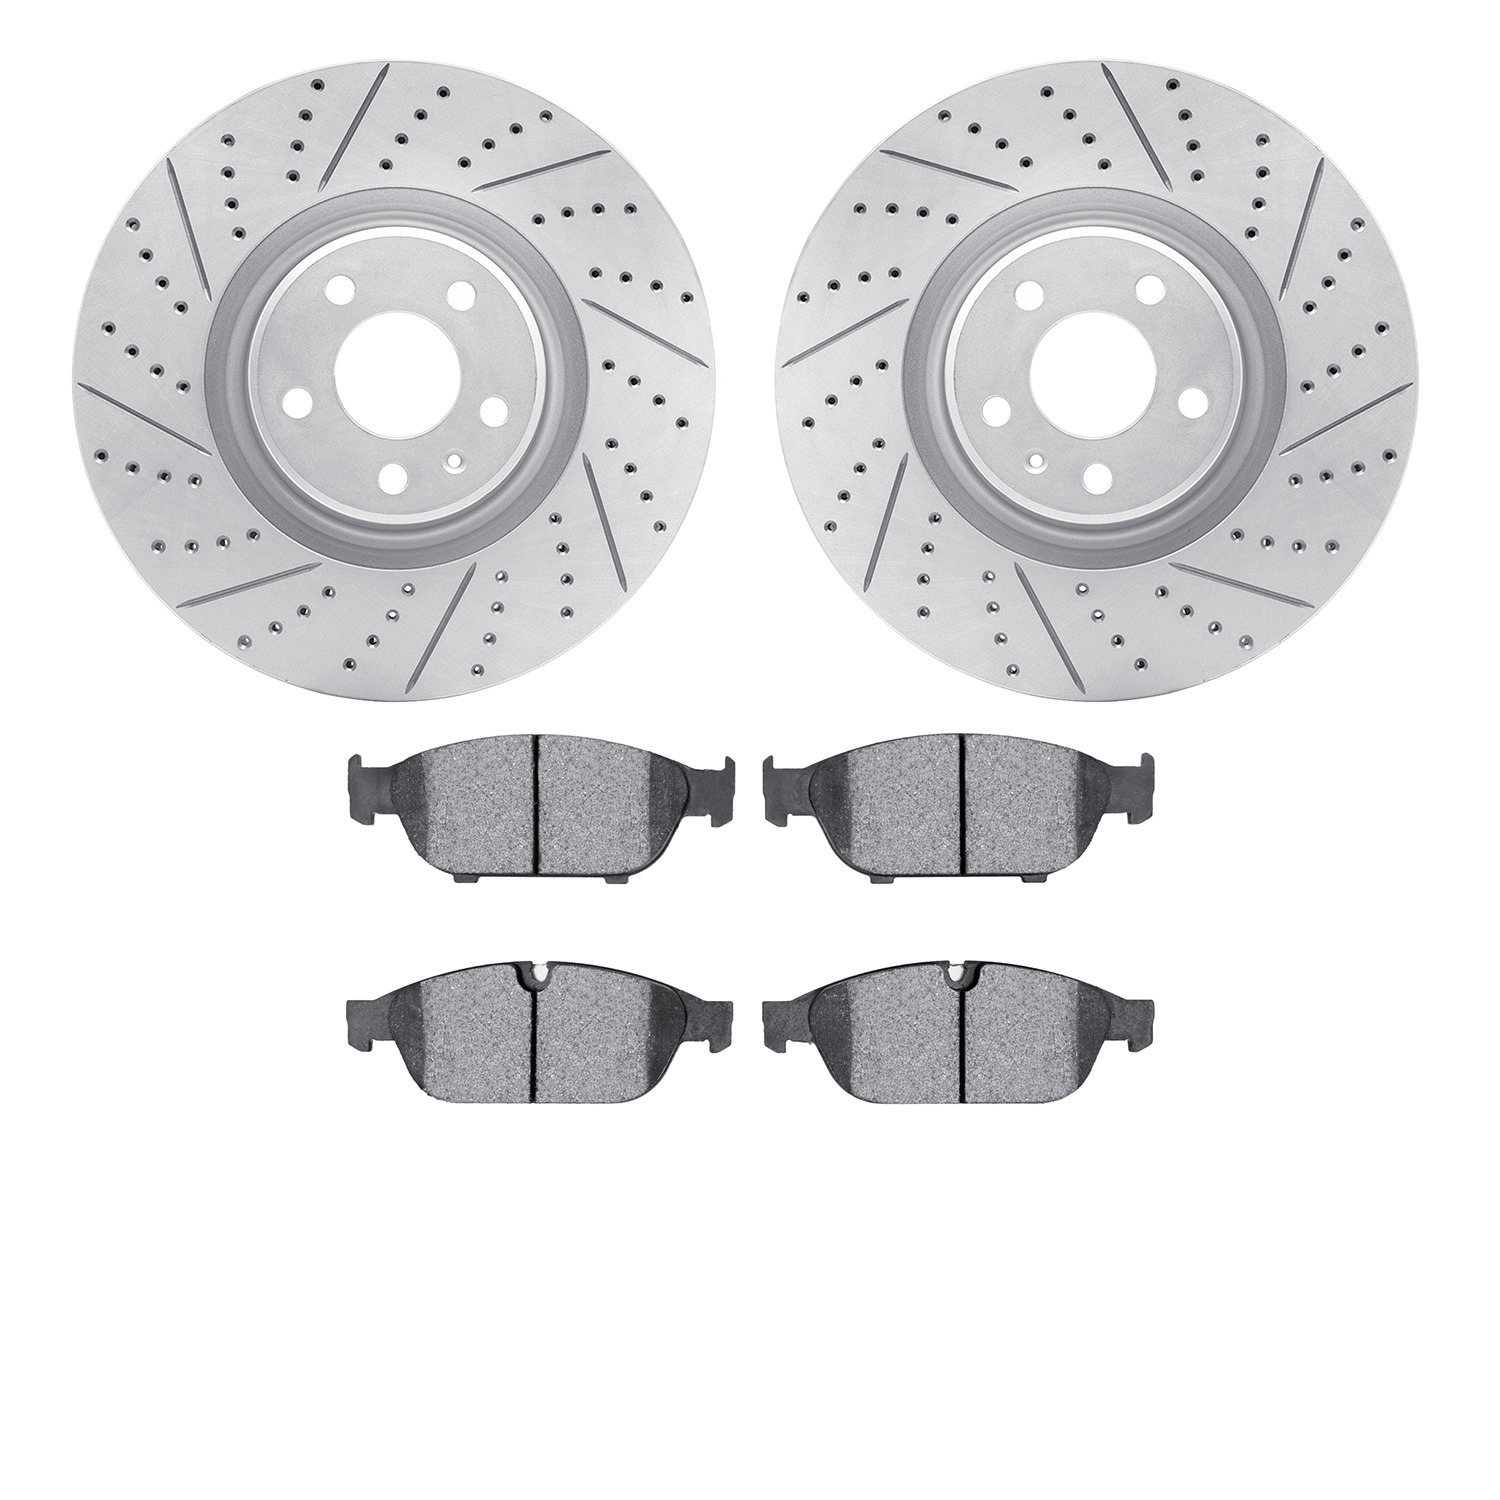 2502-73062 Geoperformance Drilled/Slotted Rotors w/5000 Advanced Brake Pads Kit, 2014-2018 Audi/Volkswagen, Position: Front